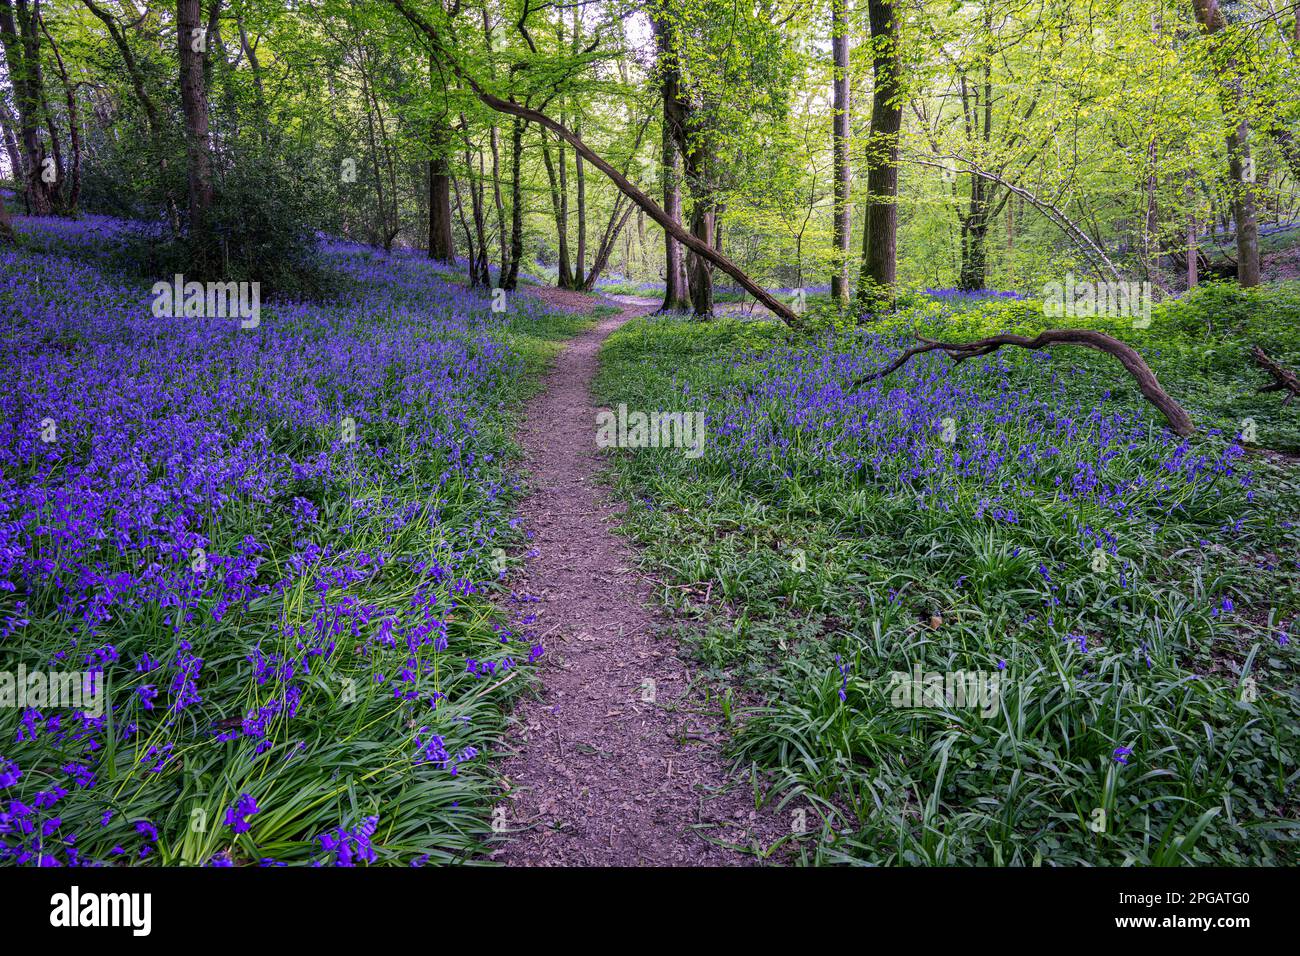 Carpet of English bluebells or Hyacinthoides non-scripta in woodland in spring, East Sussex, England Stock Photo